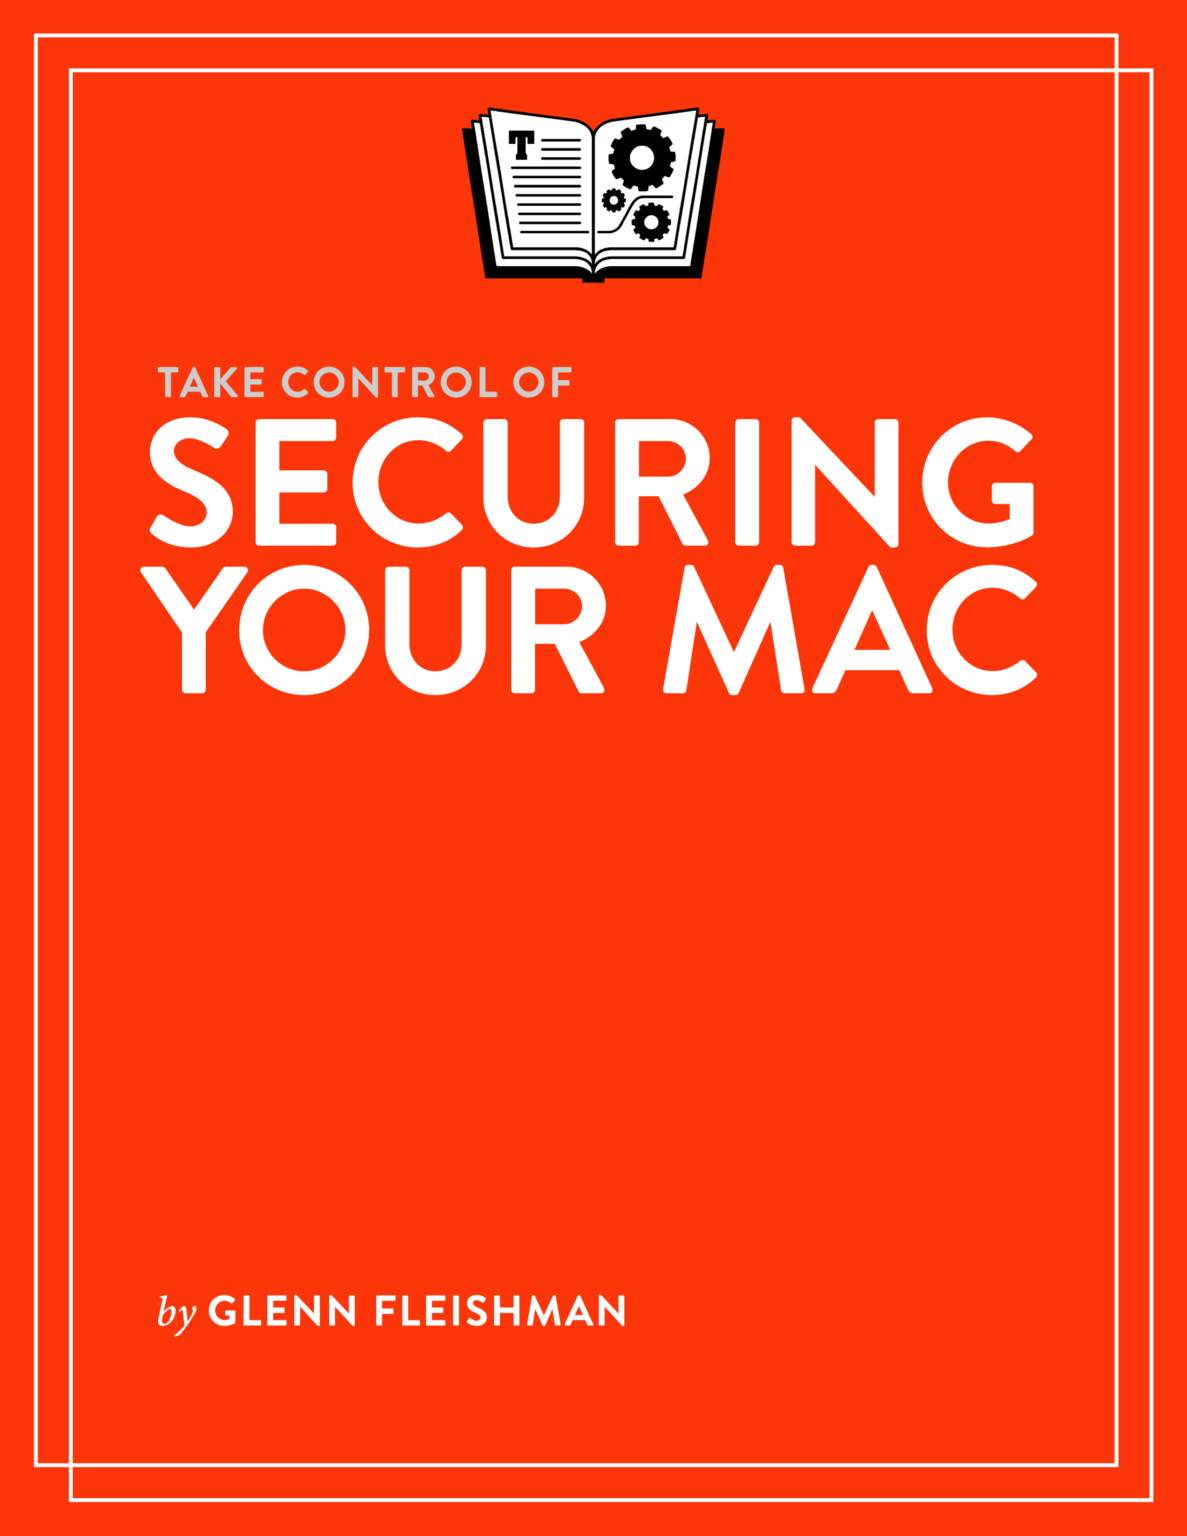 Take-Control-of-Securing-Your-Mac-1.0-cover-1187x1536.png